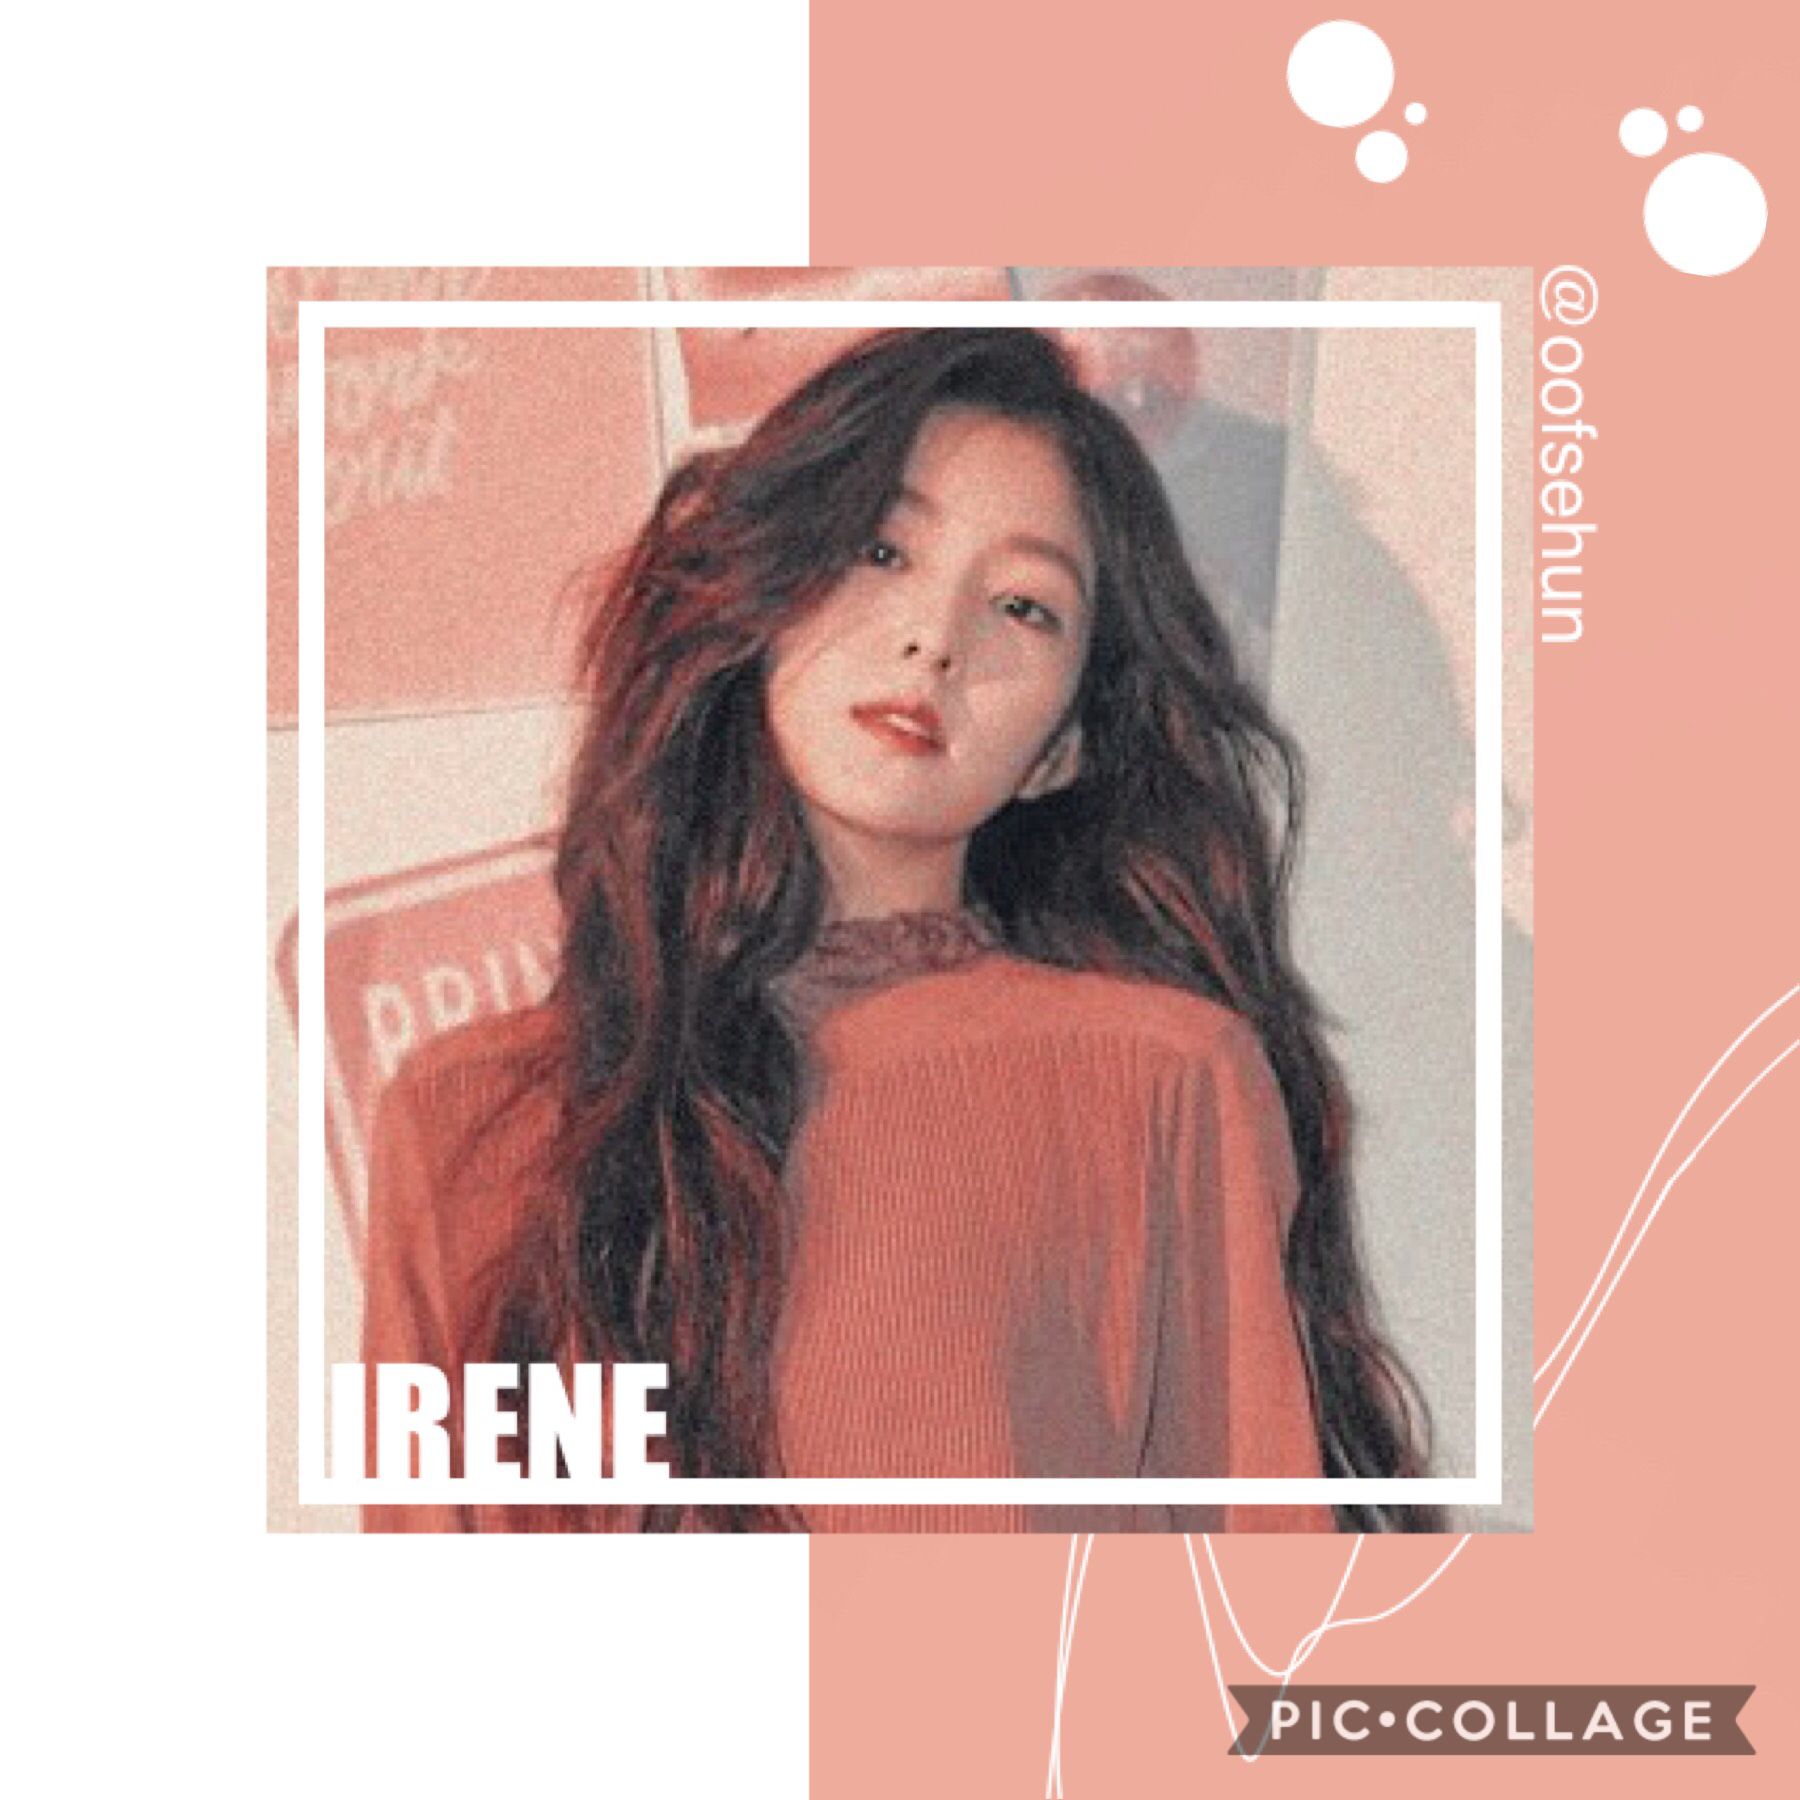 💫ｉｒｅｎｅ (tap)

oml guys sorry for my inactivity (again)
this month has been so stressful oof
also i have no inspo

and i might not be active until next month
sorry if i take forever to reply to your comments!
ilyasm have a great day//night ❤️